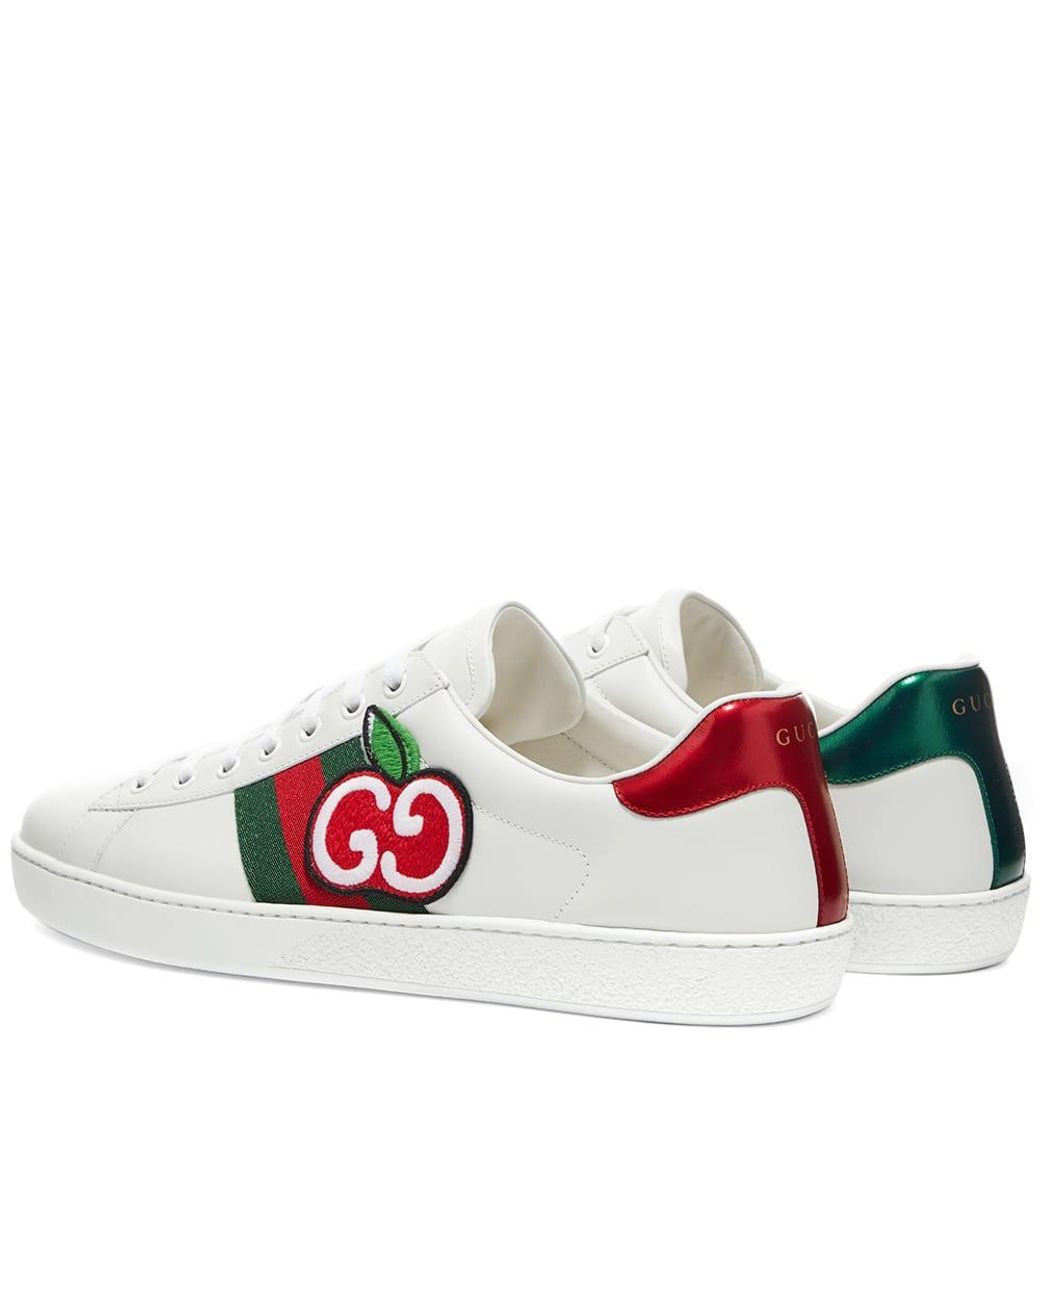 gucci Ace sneakers with GG Apple